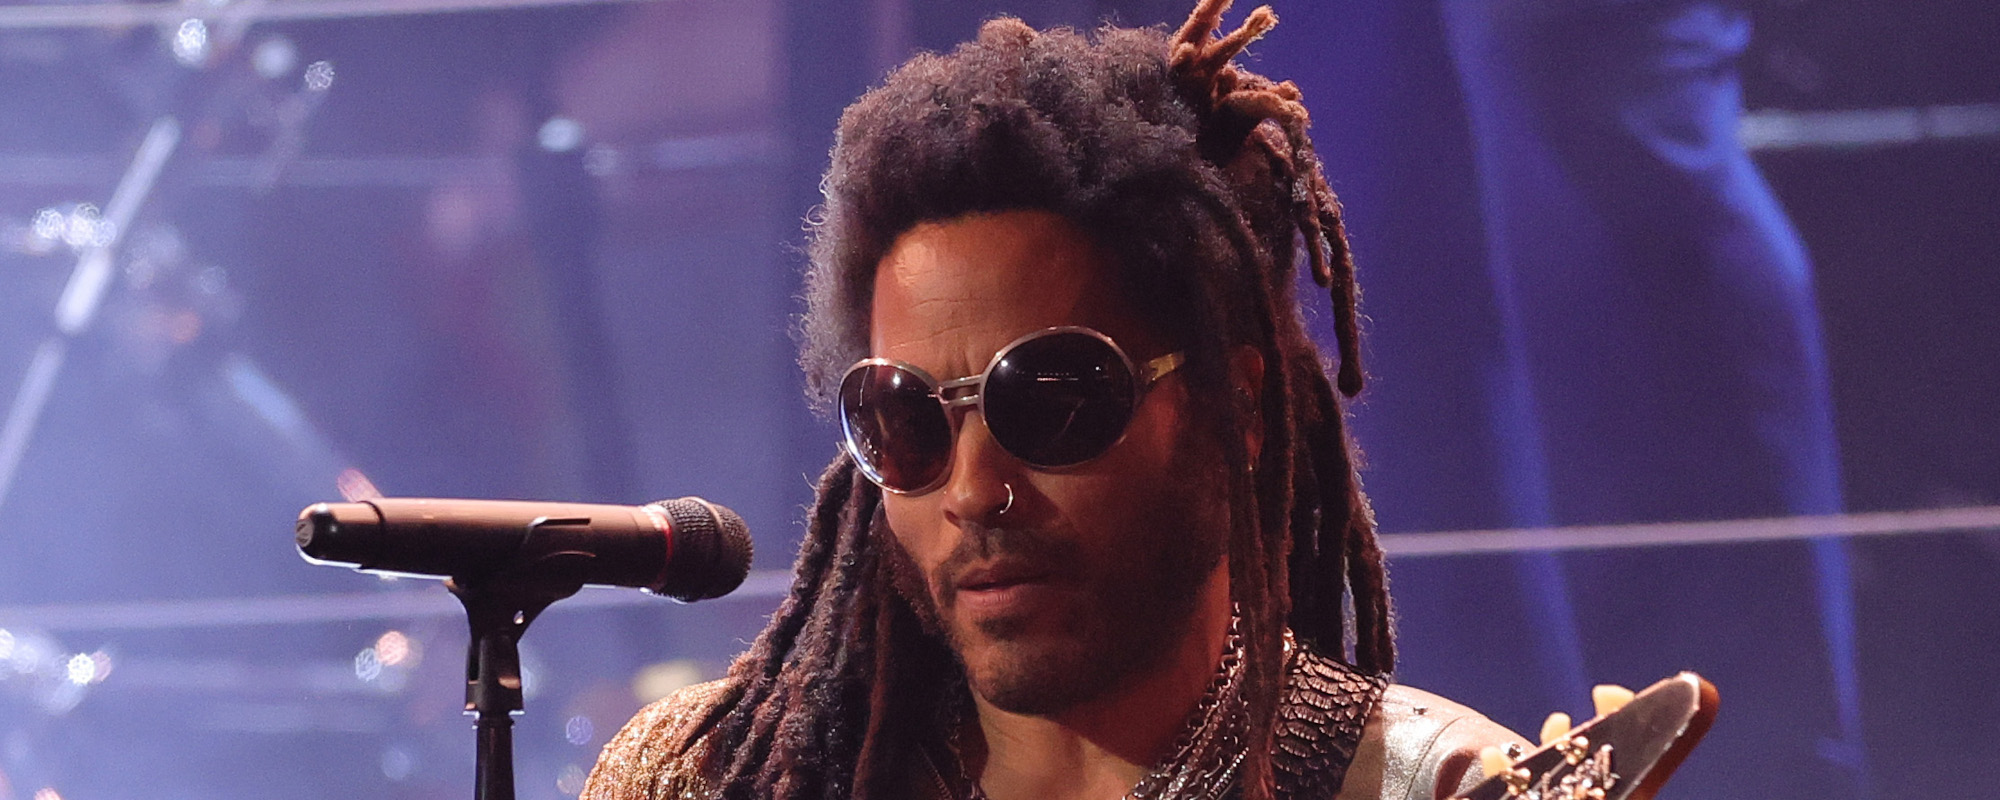 Songs You Should Know: “Are You Gonna Go My Way” by Lenny Kravitz